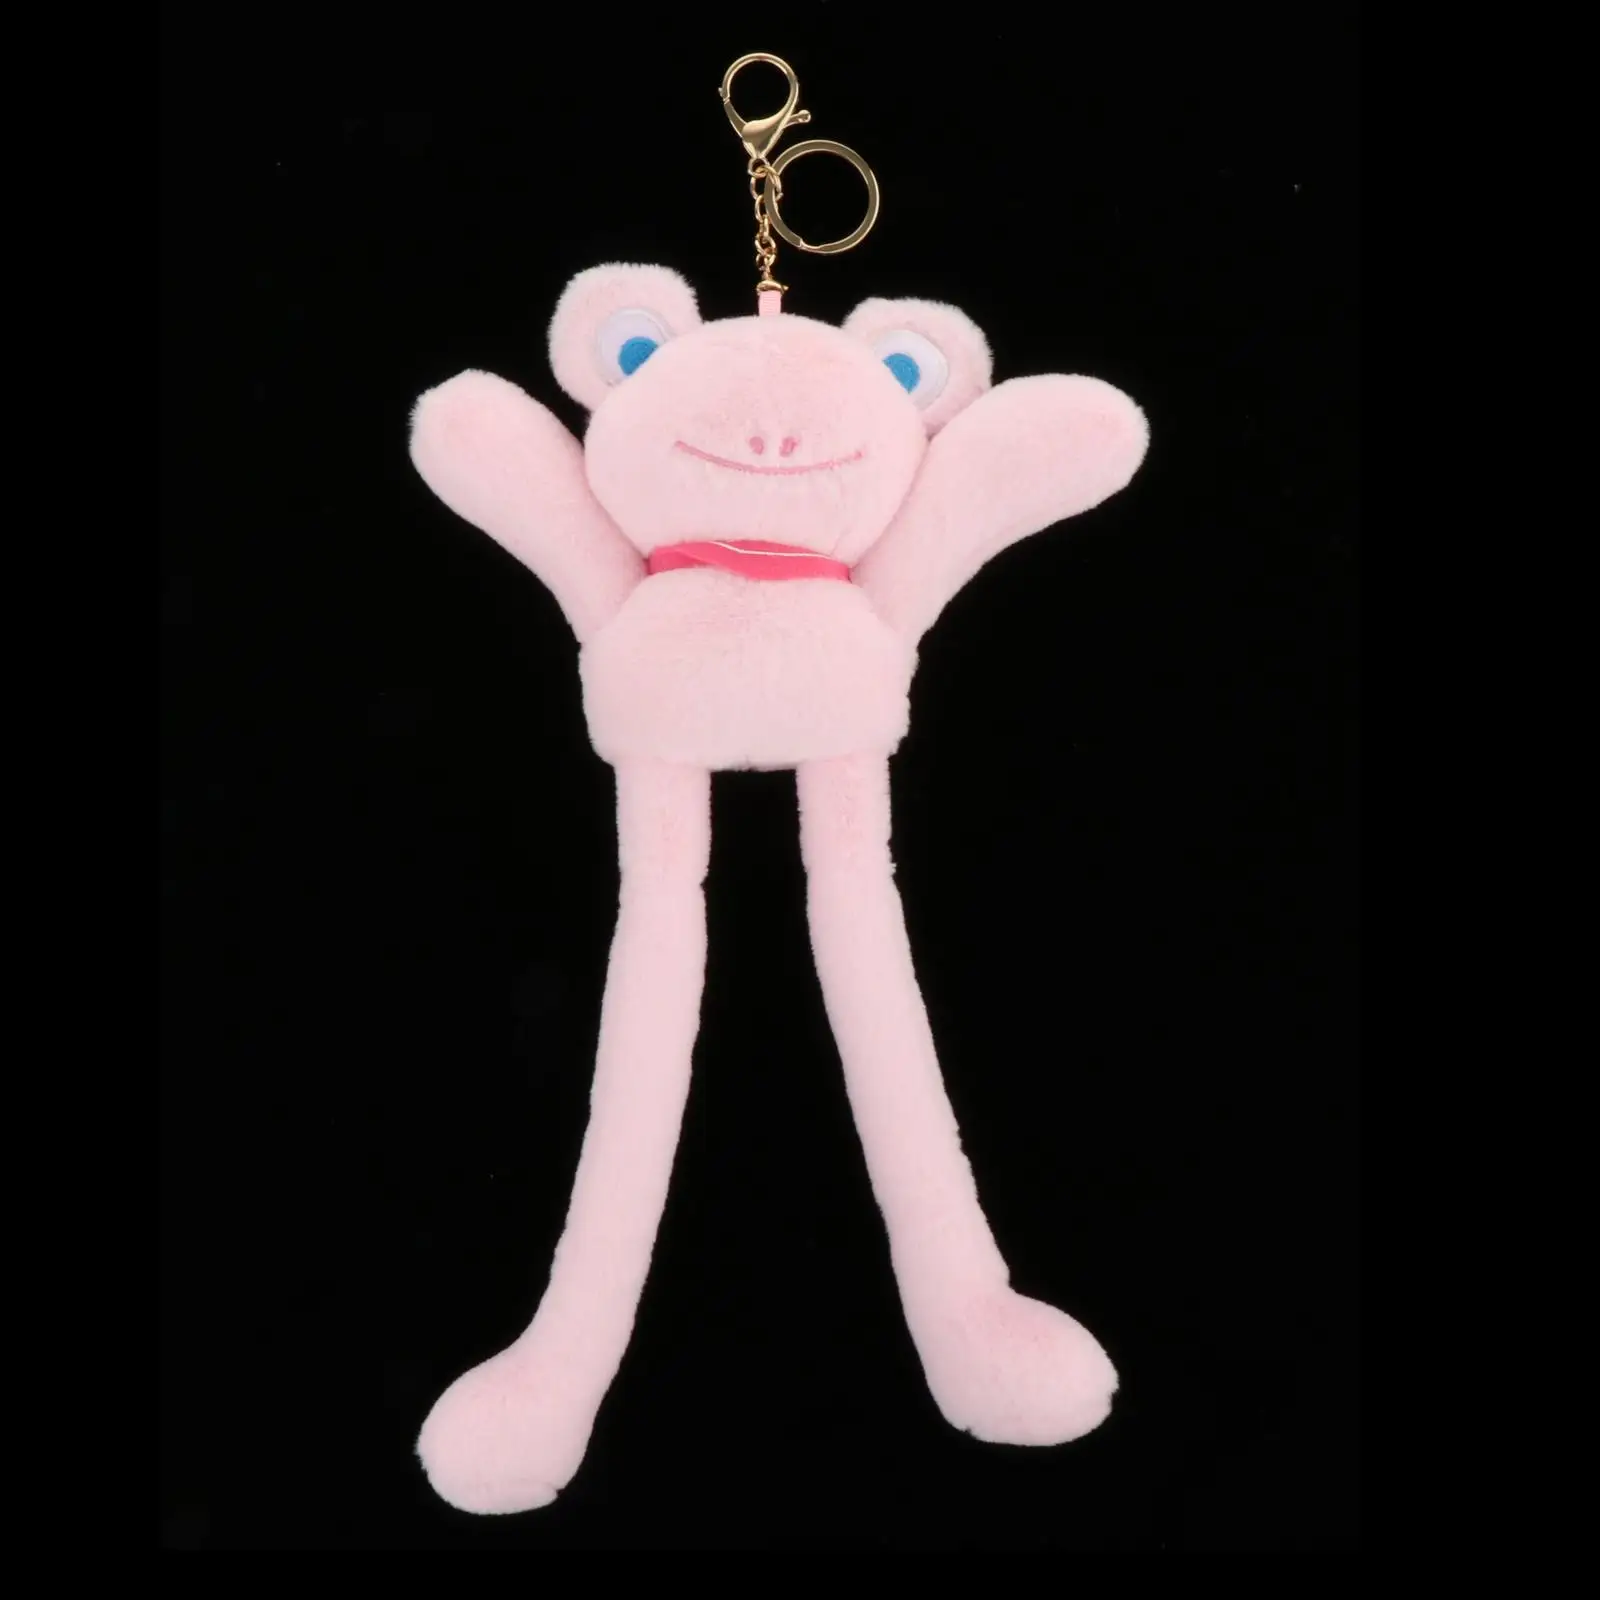 Cute Pulling Plush Doll Adjustable Floppy Ears Legs for Home Party Children